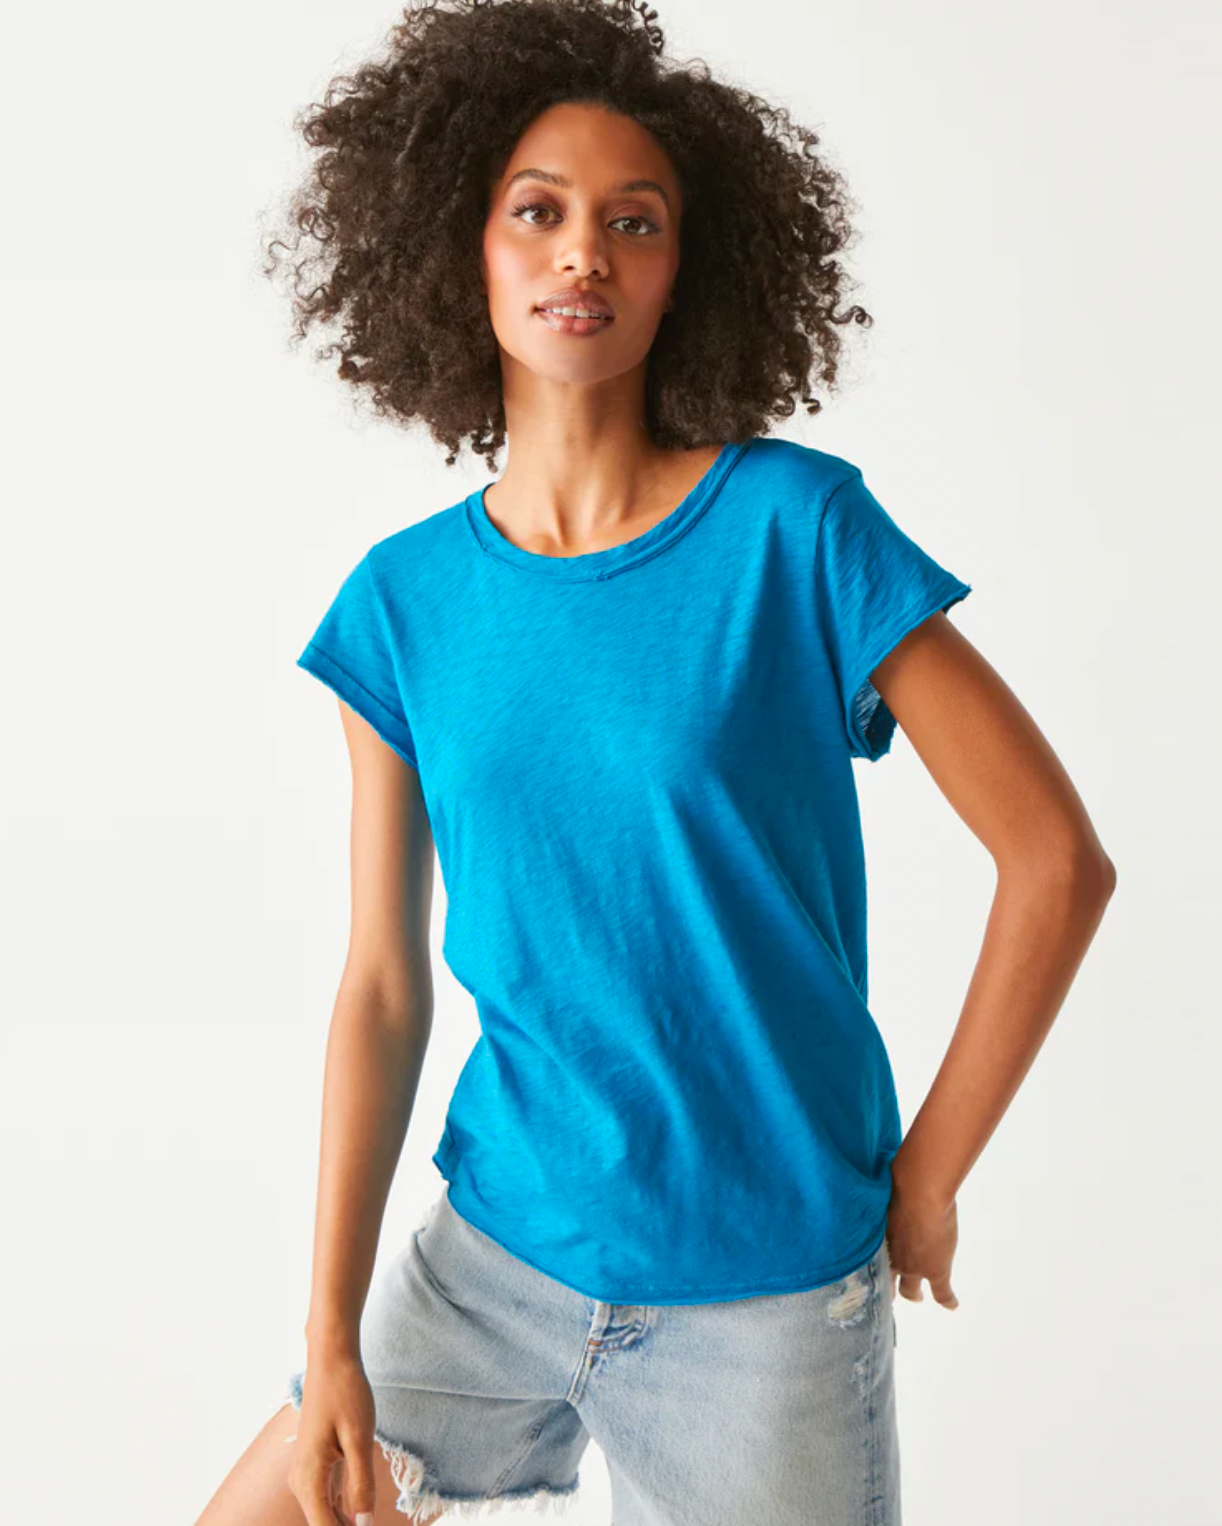 Model wearing a Michael Stars Trudy Crew tee in pacific wearing jeans on a white background